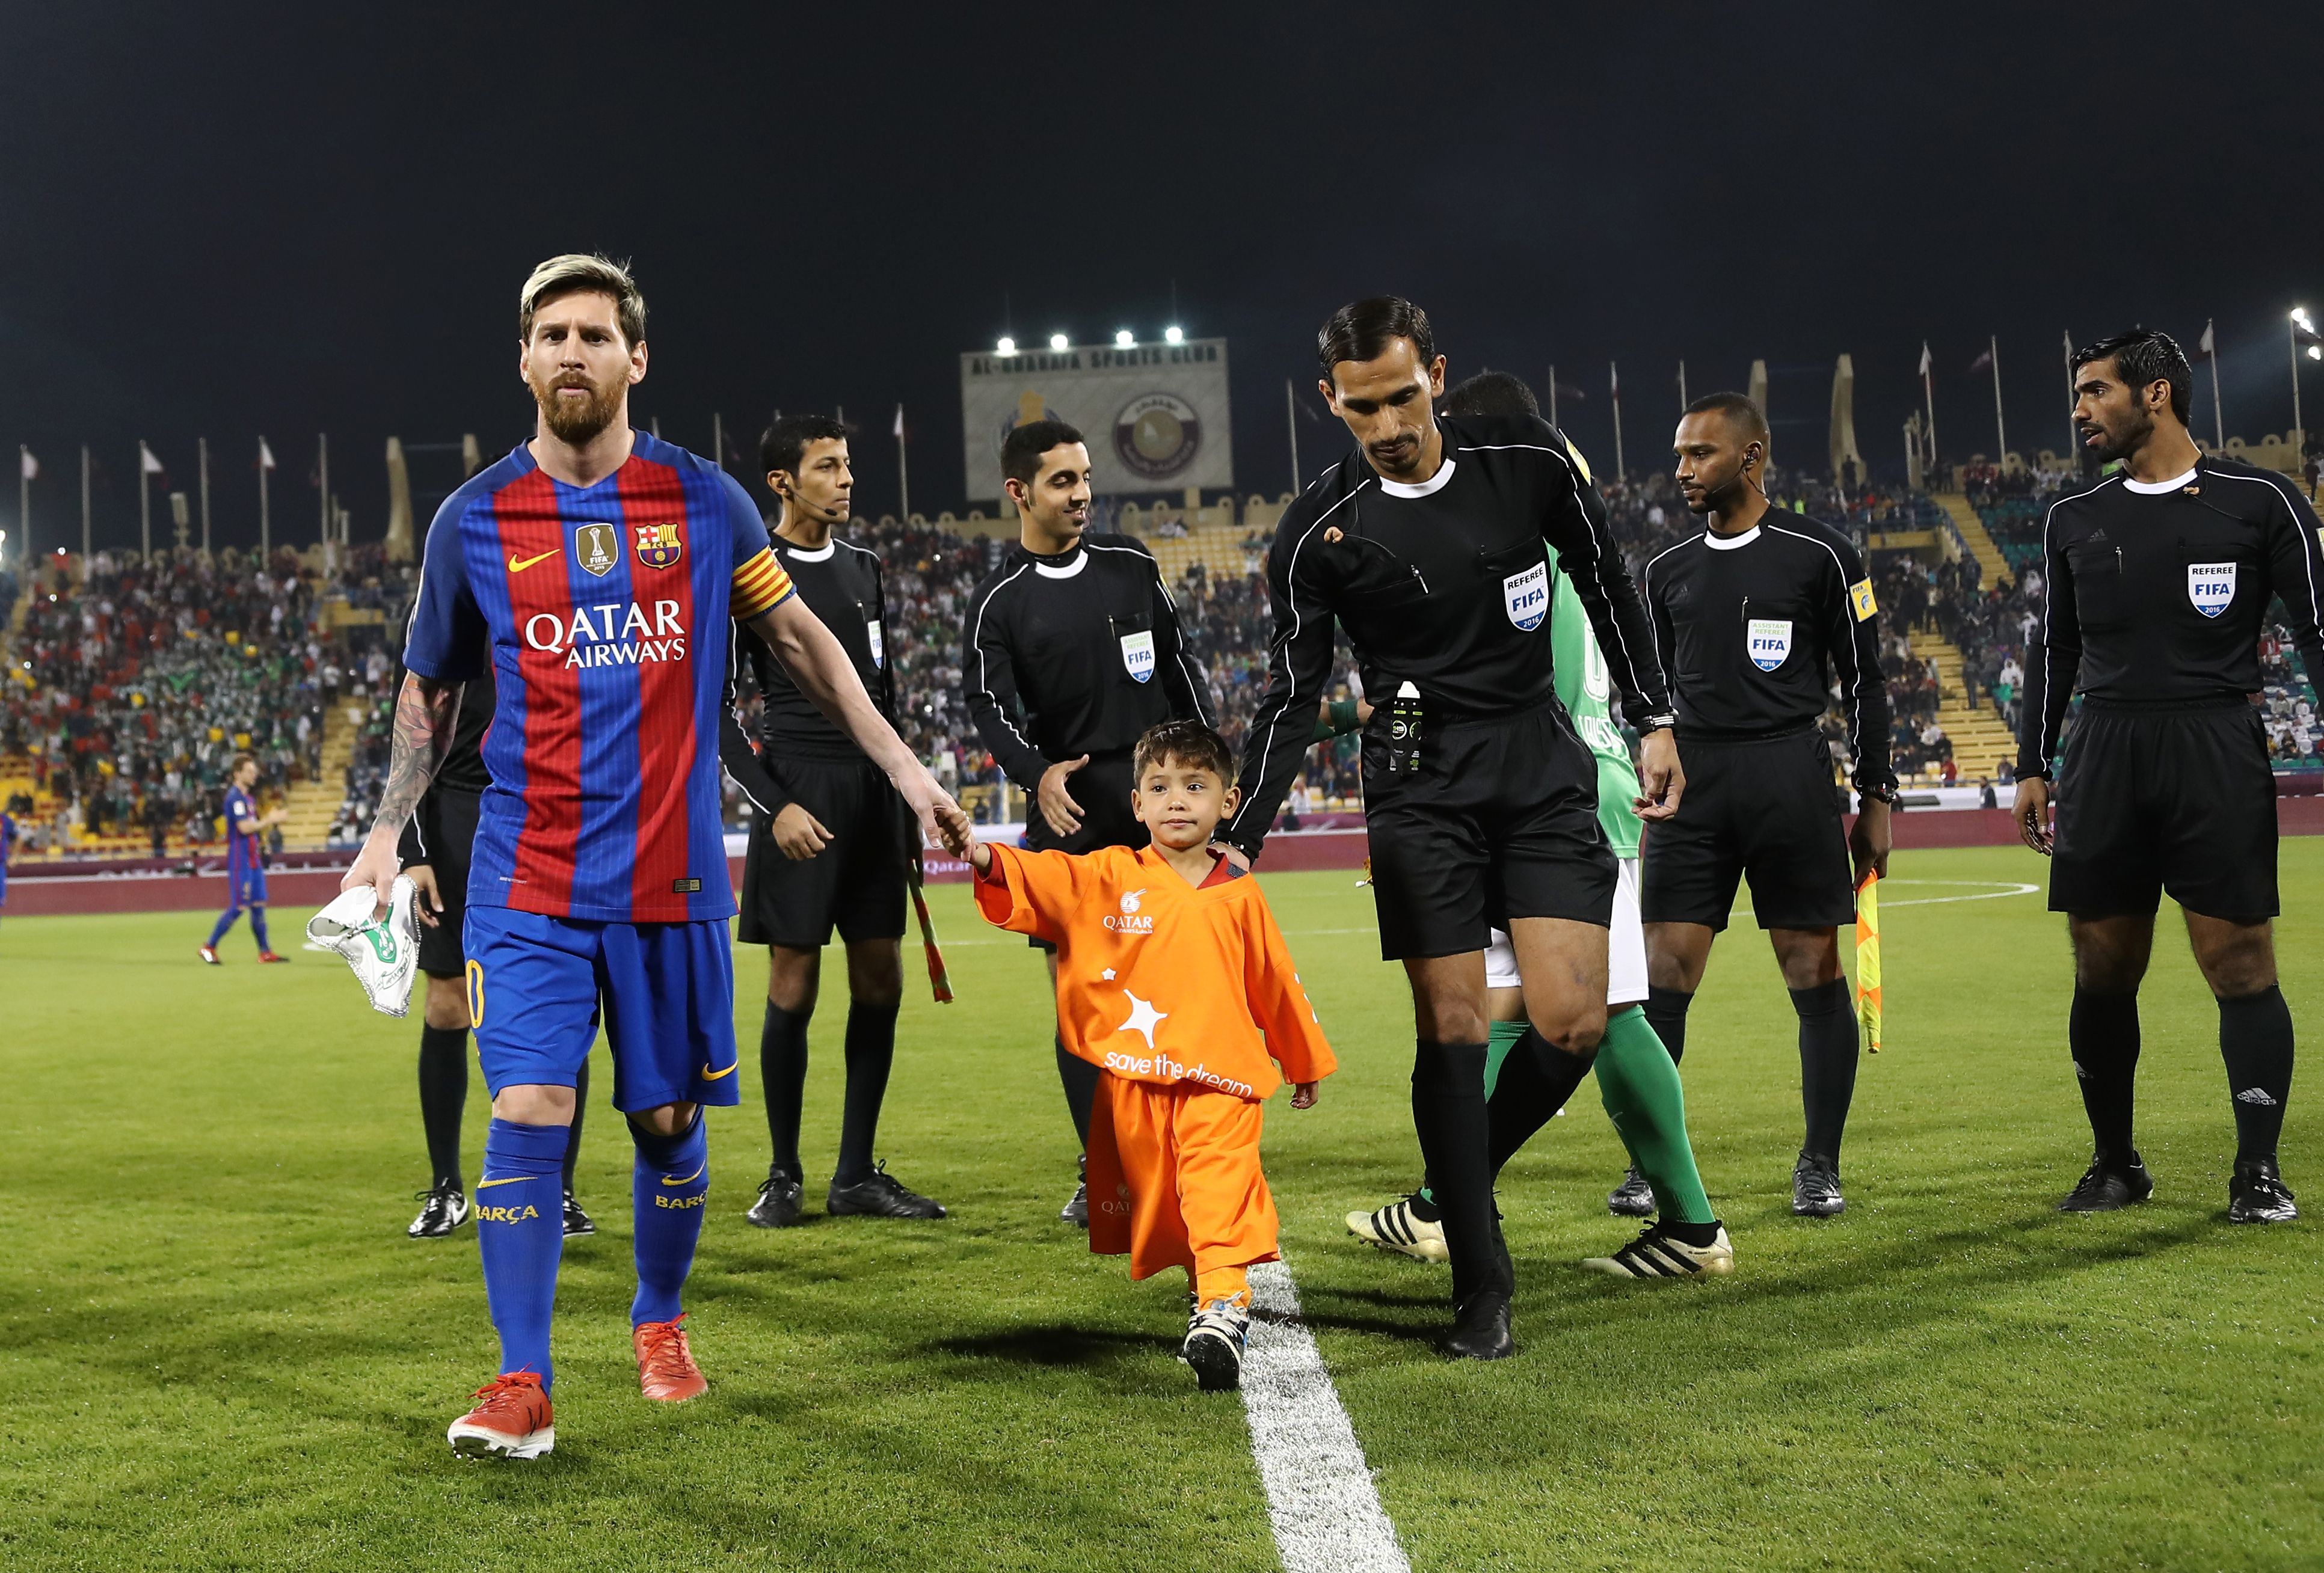 FC Barcelona Lionel Messi (L) holds the hands of Afghan boy Murtaza Ahmadi on the pitch before the start of a friendly football match against Saudi Arabia's Al-Ahli FC on December 13, 2016 in the Qatari capital Doha. 
Barcelona play Saudi champions Al-Ahli in a friendly in Doha, the Spanish club's last major obligation of its four year shirt sponsorship deal with Qatar Airways.

 / AFP / KARIM JAAFAR        (Photo credit should read KARIM JAAFAR/AFP/Getty Images)